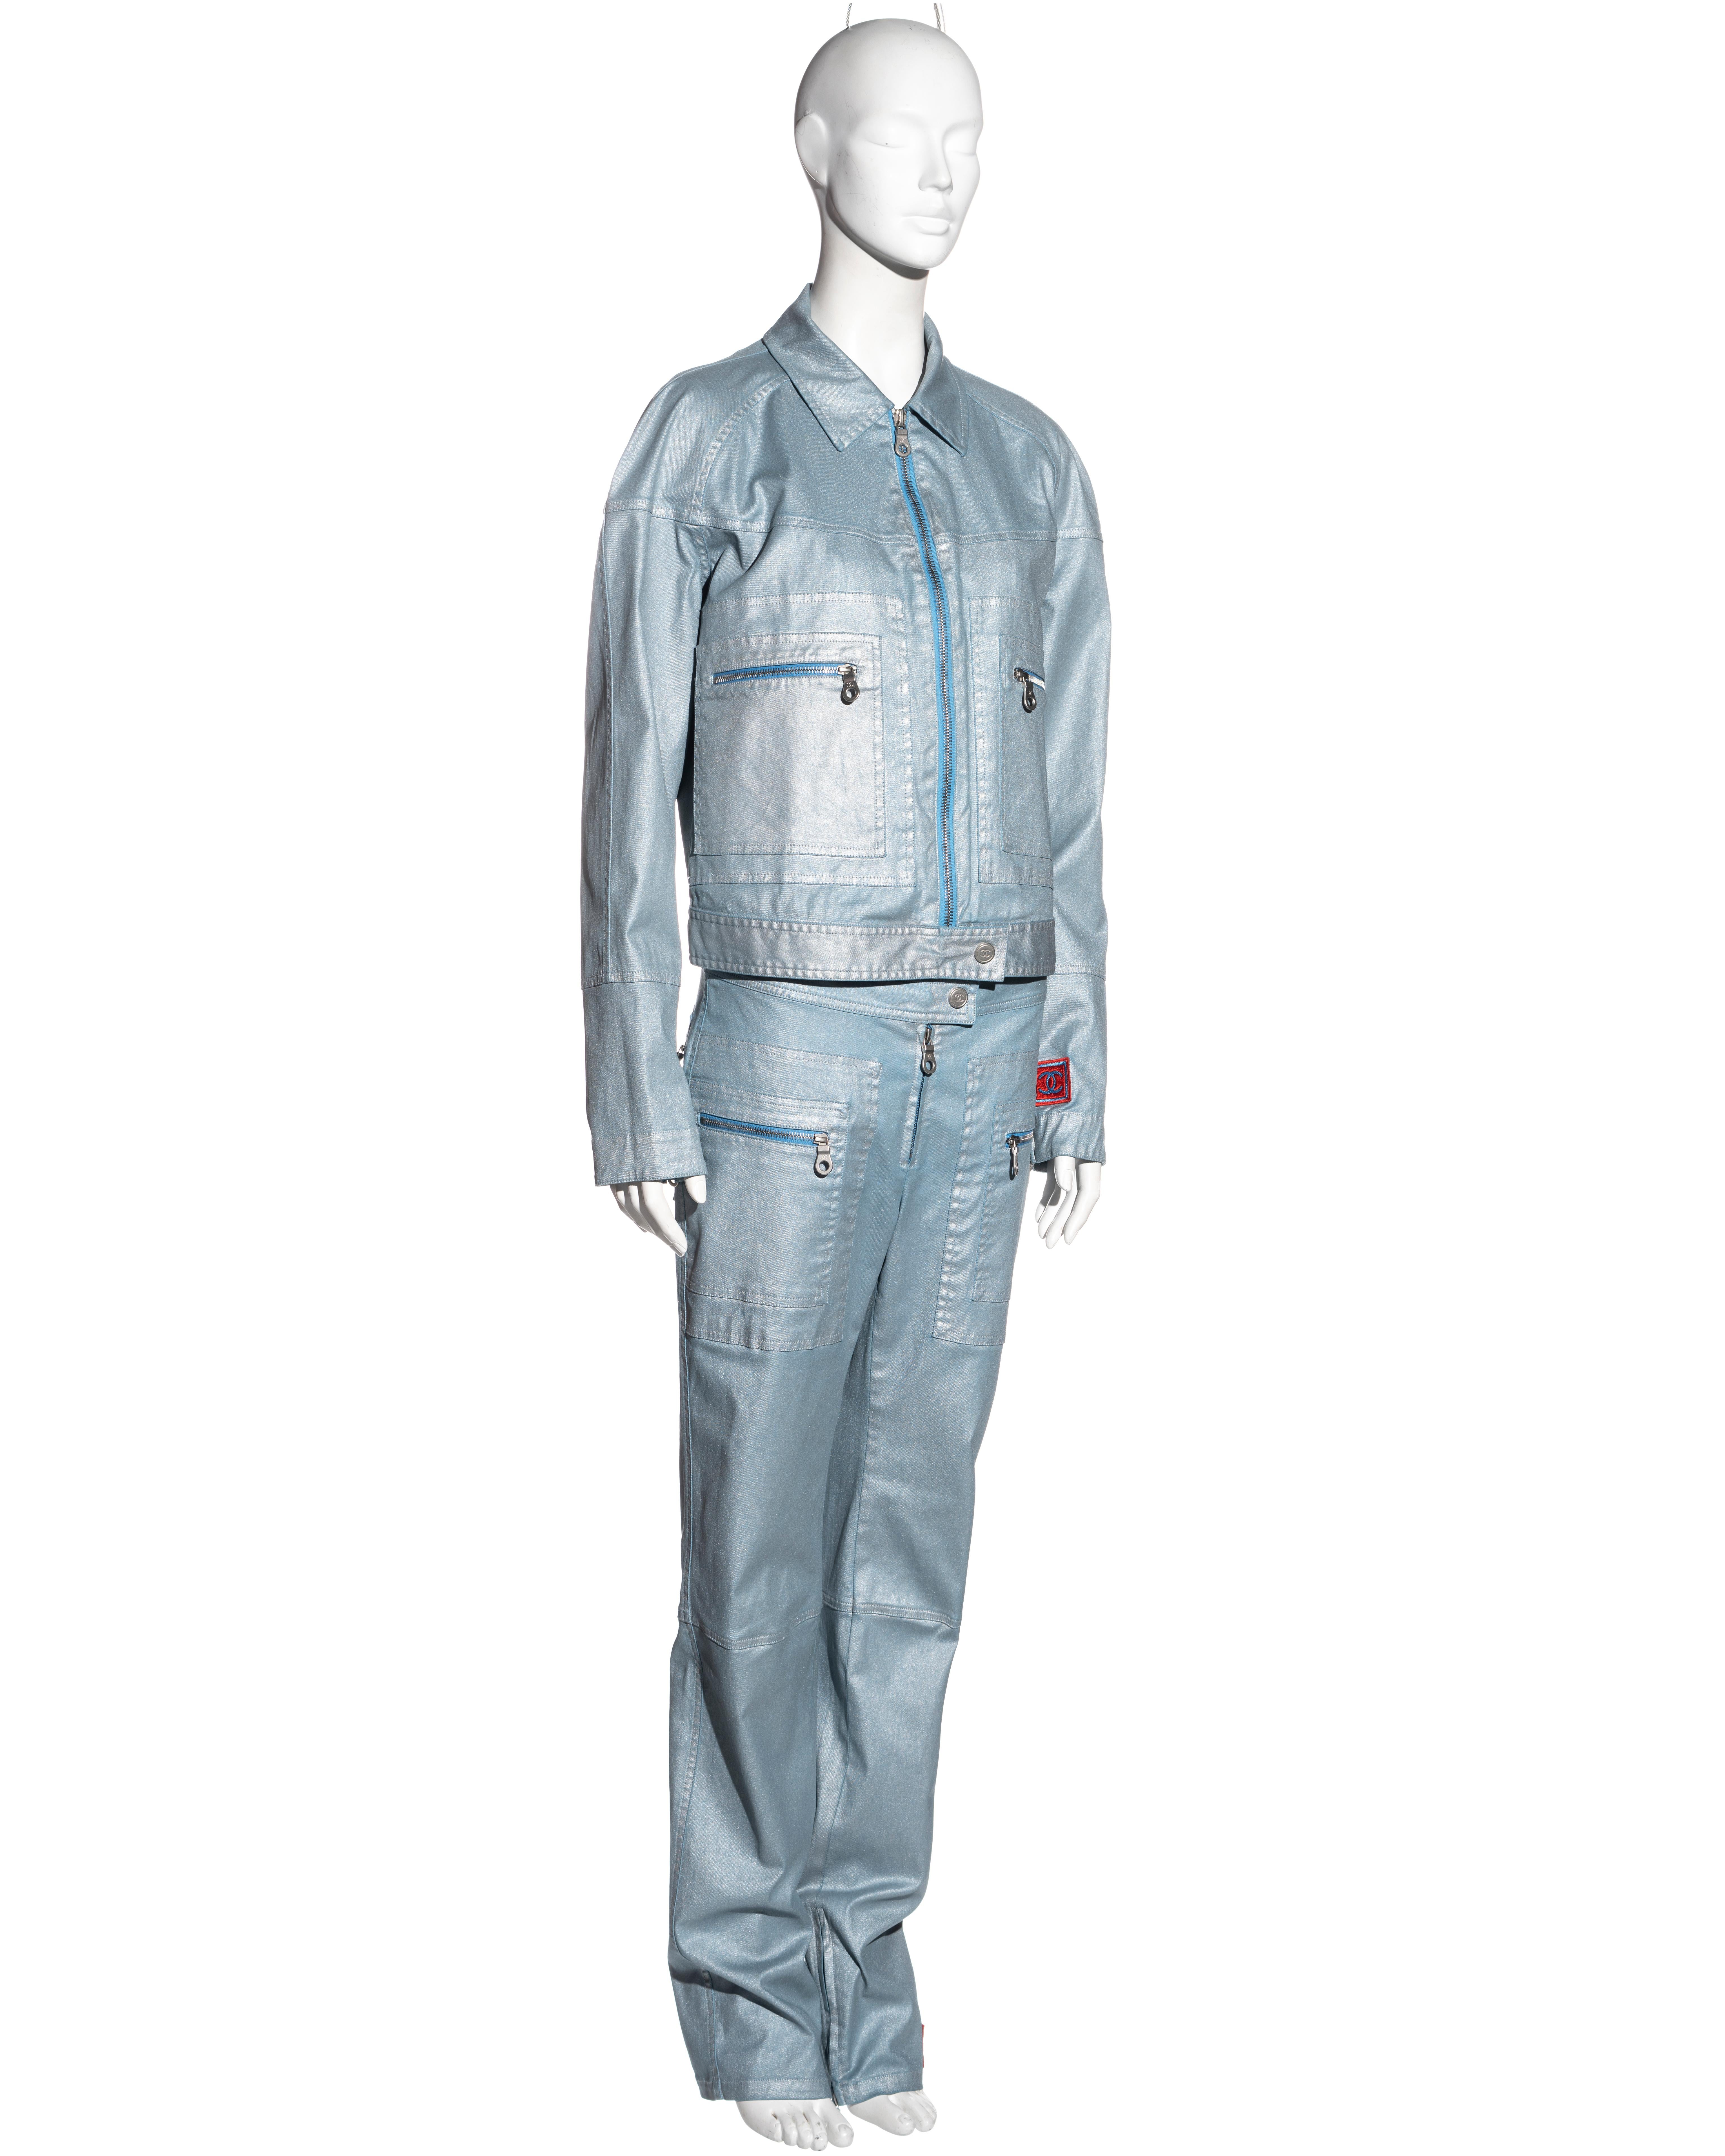 Chanel by Karl Lagerfeld metallic blue cotton jacket and pants set, ss 2002 In Excellent Condition For Sale In London, GB